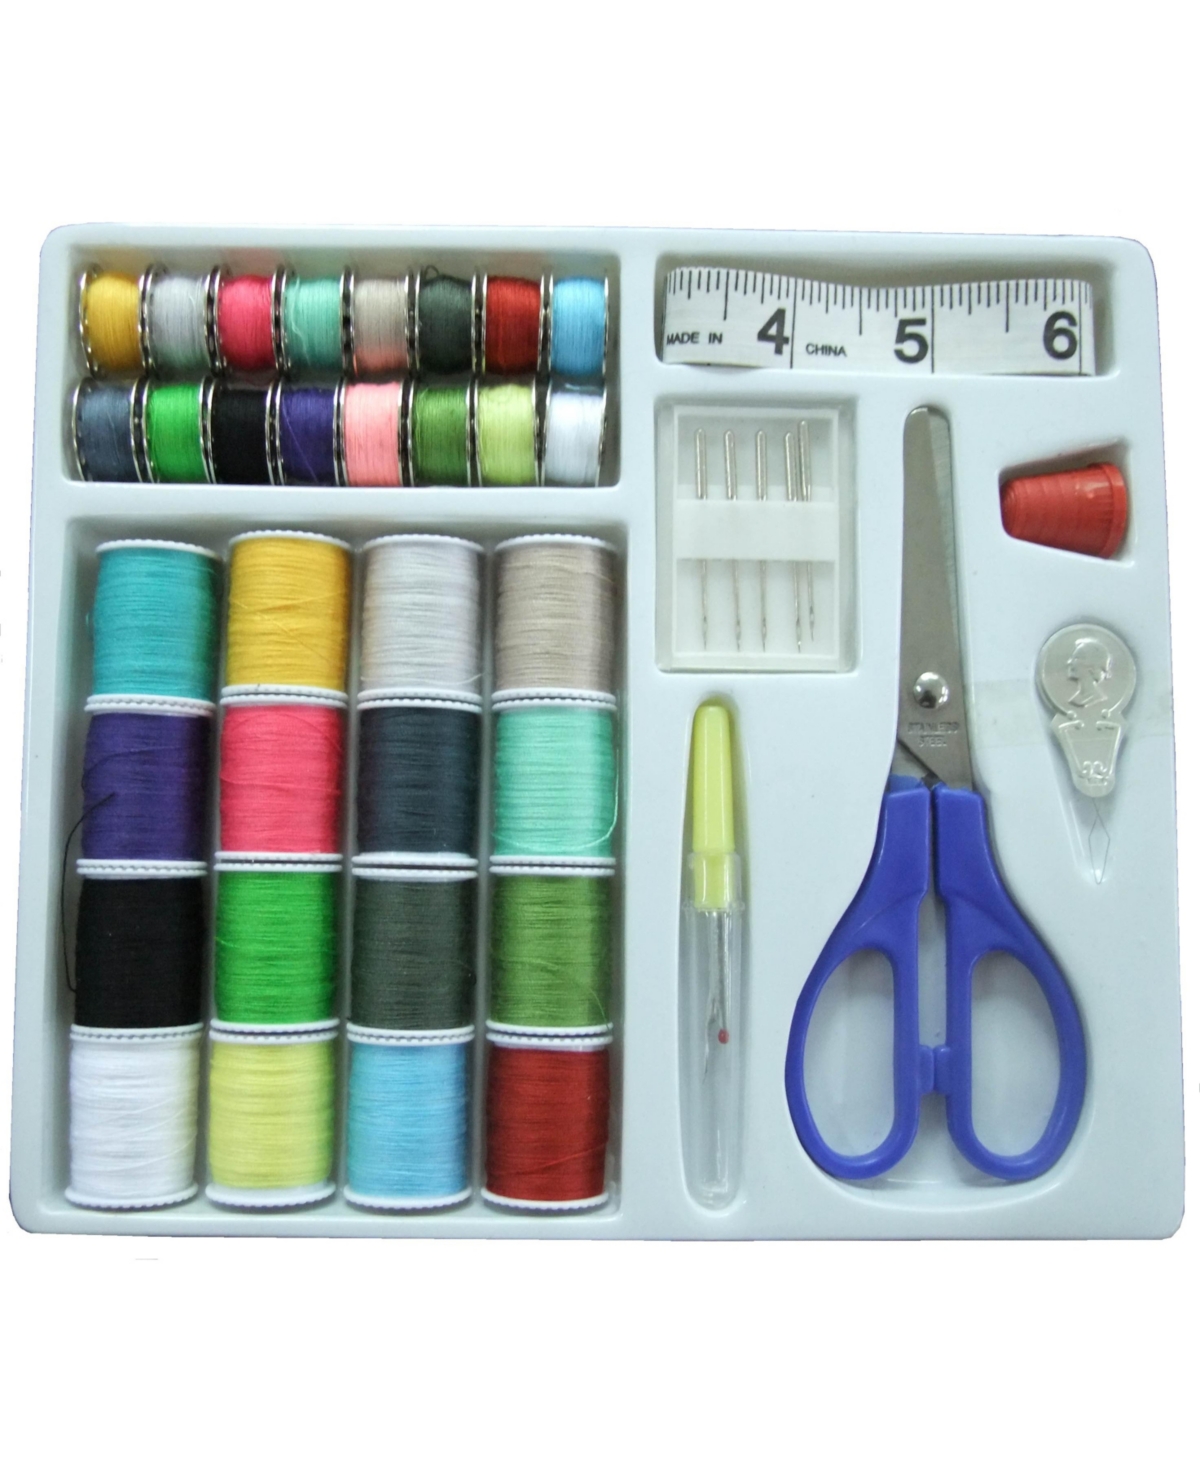 Michley 42-pc Sewing Kit Fs-042